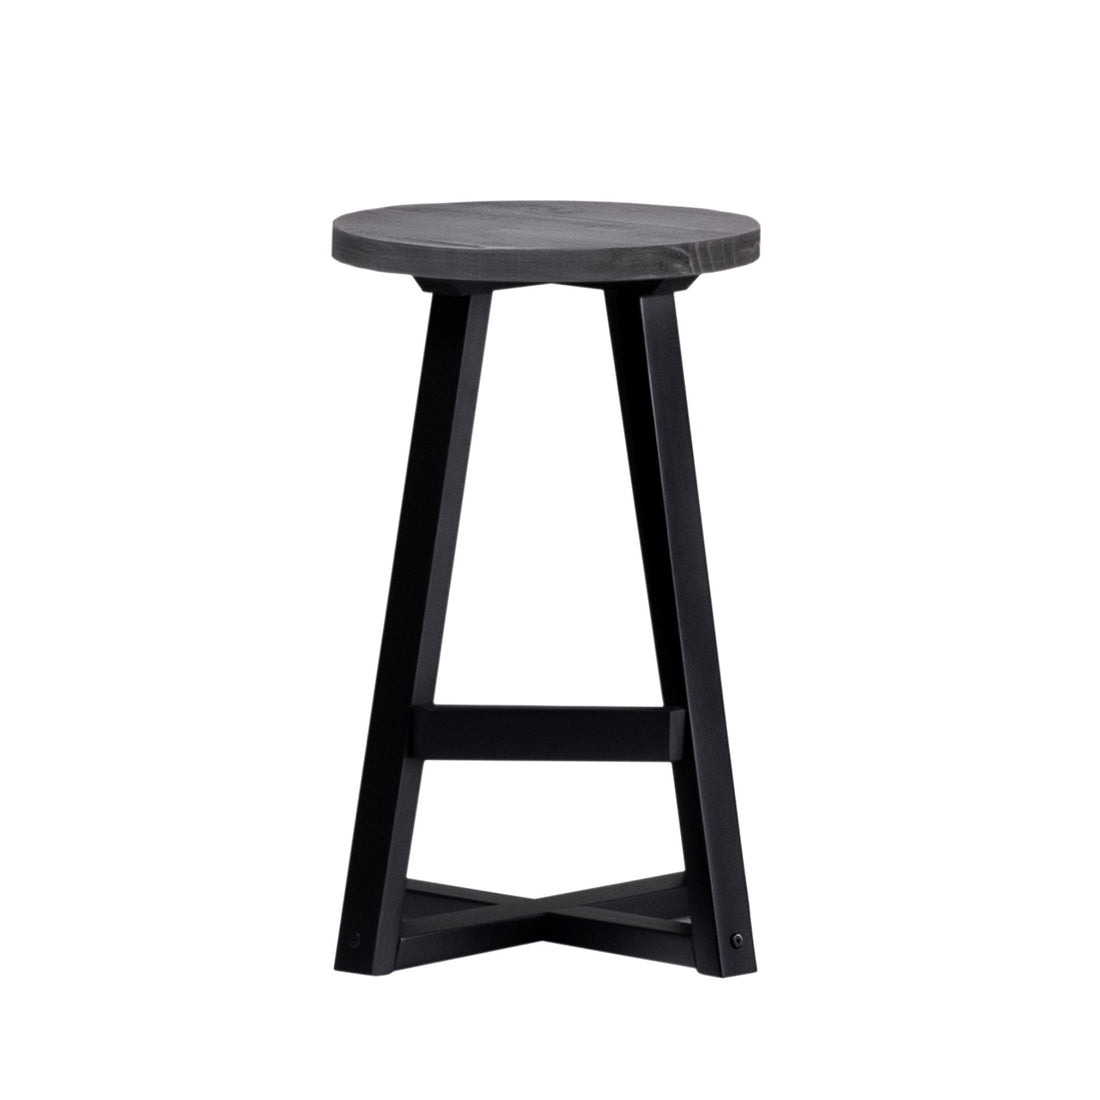 Rustic Distressed Solid Wood Round Dining Stool